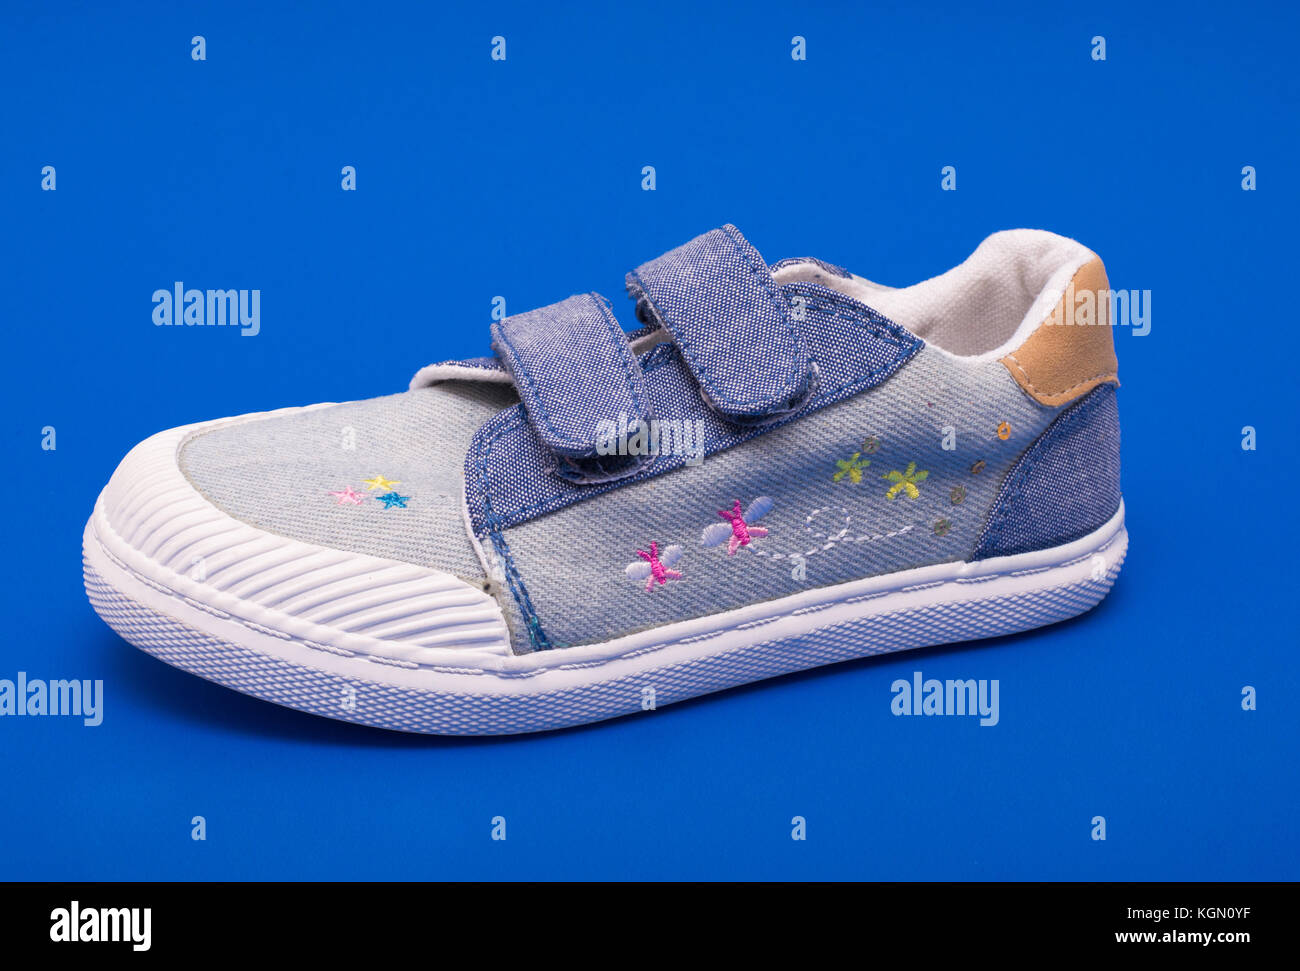 Pair of fashion denim baby shoes for the toddlers feet. Kids sneakers isolated on blue background Stock Photo